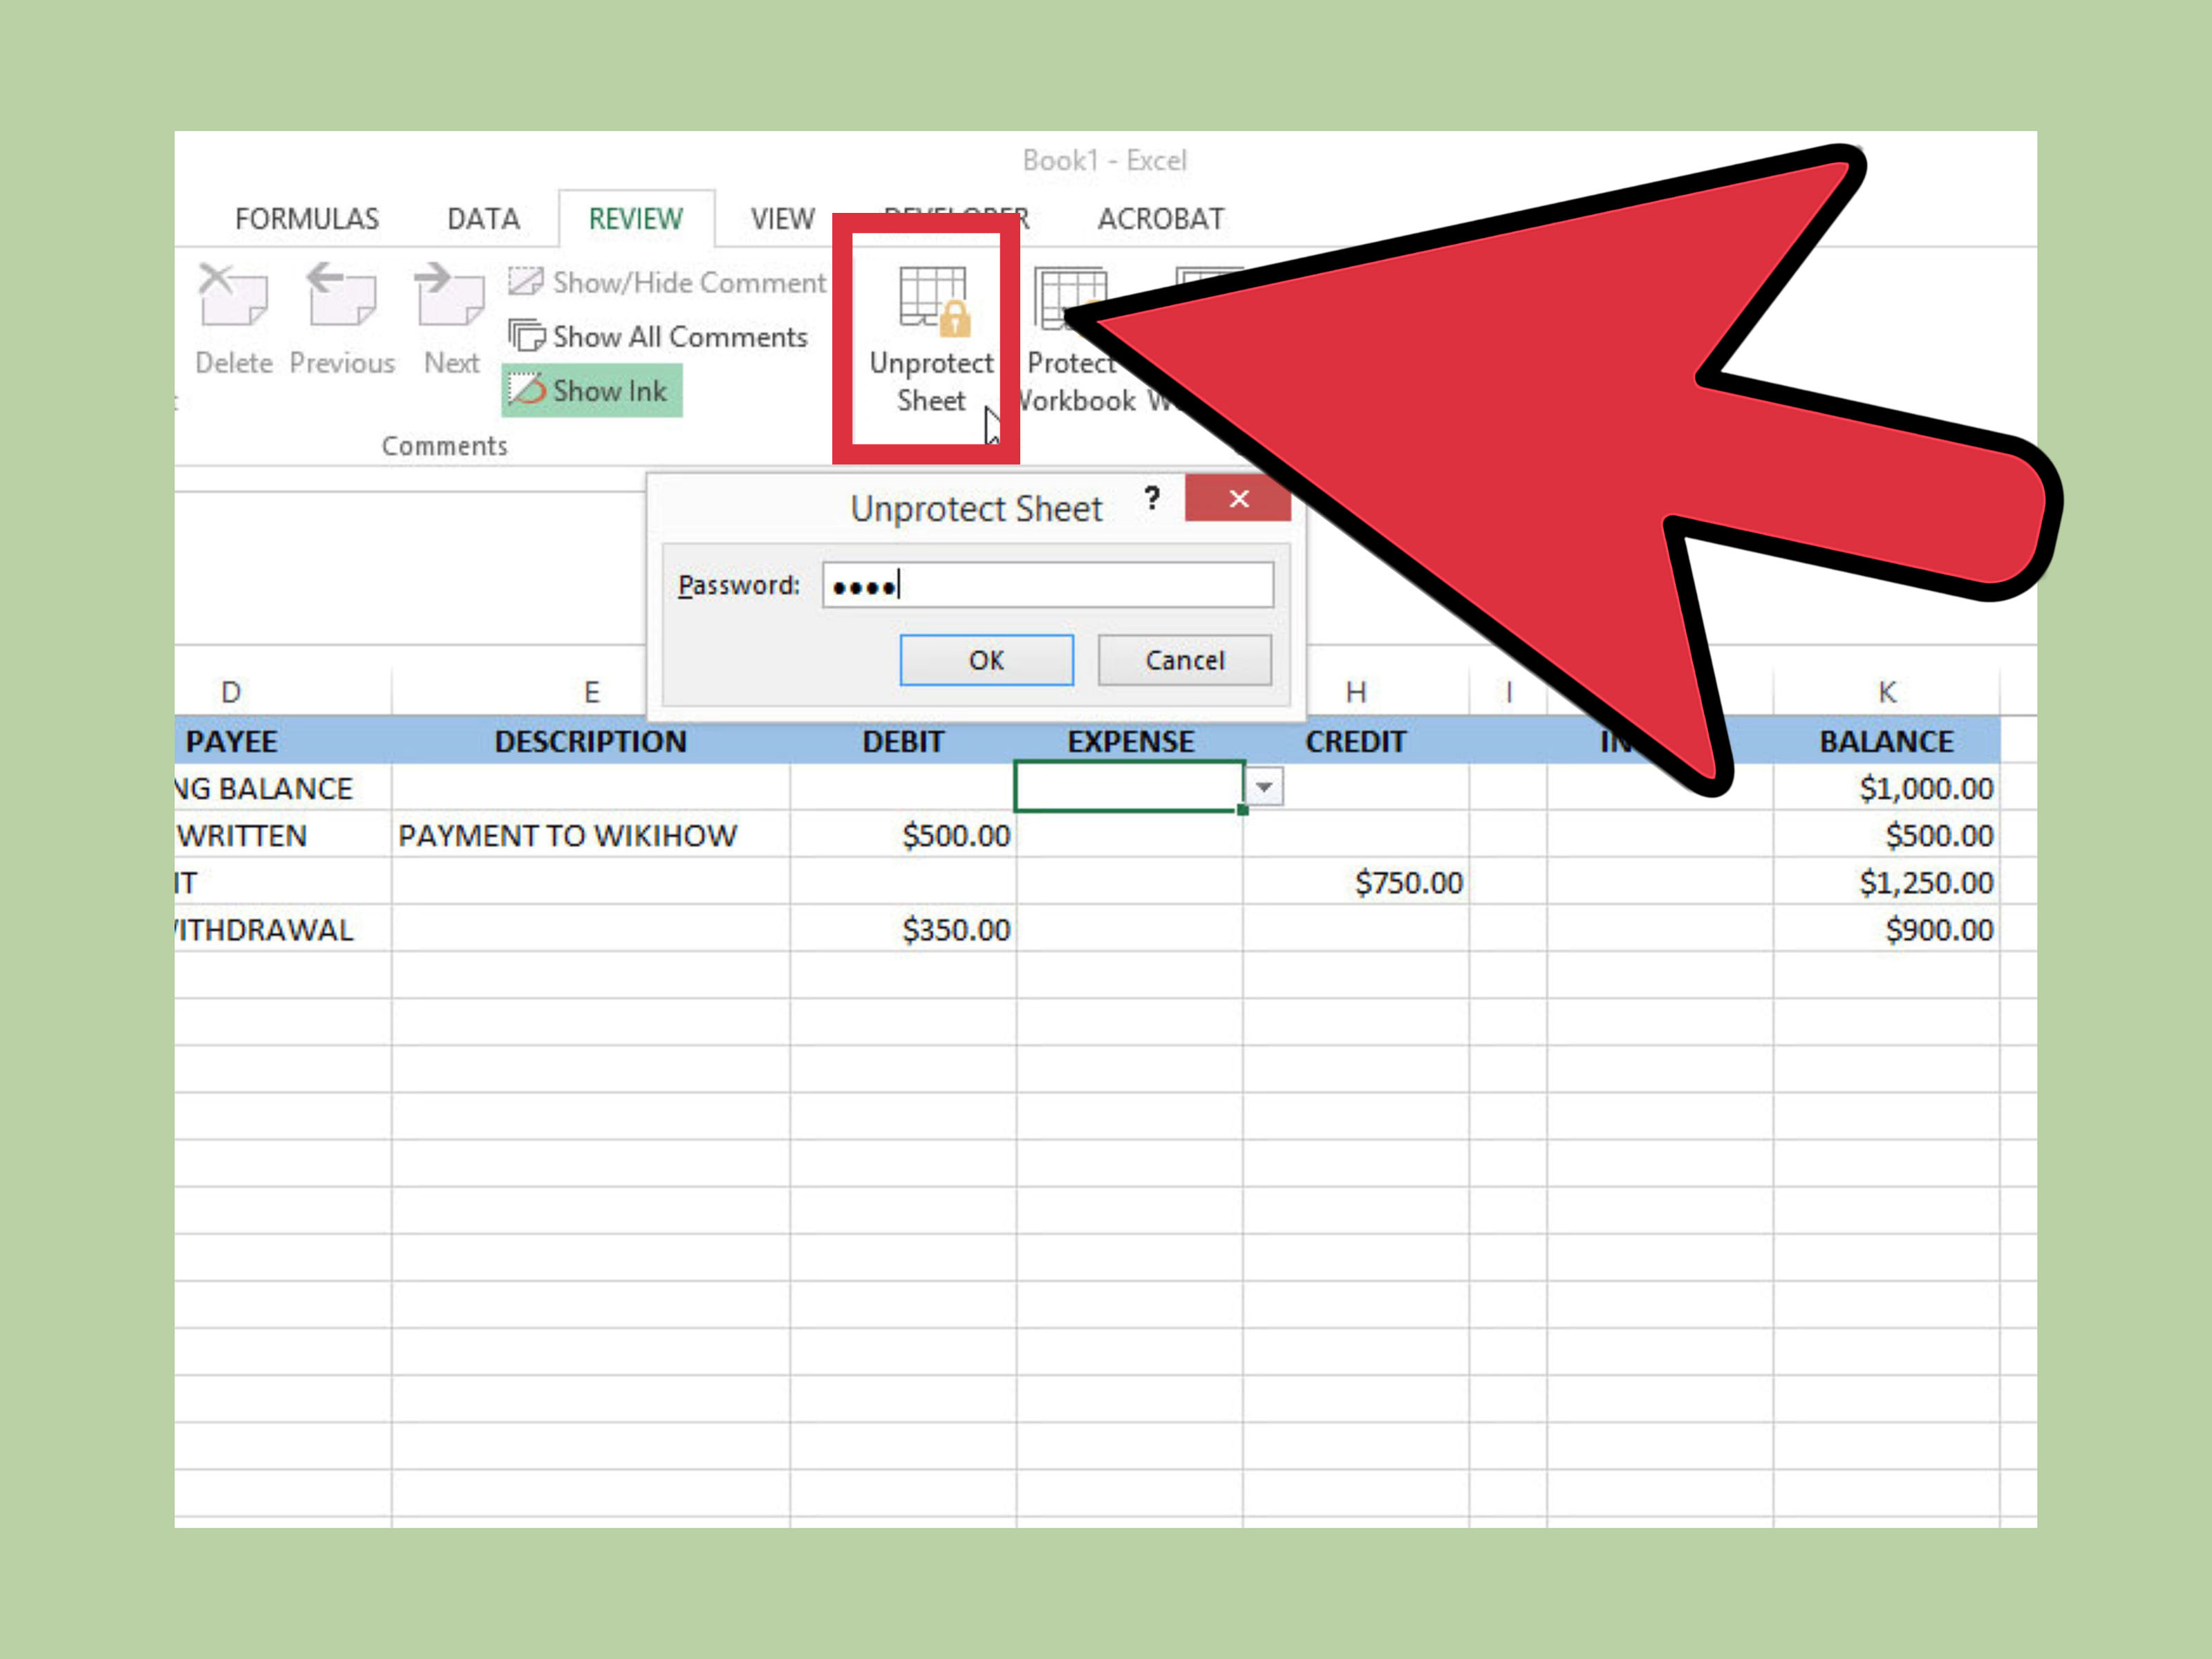 Basic Spreadsheet Proficiency With Microsoft Excel Regarding How To Create A Simple Checkbook Register With Microsoft Excel